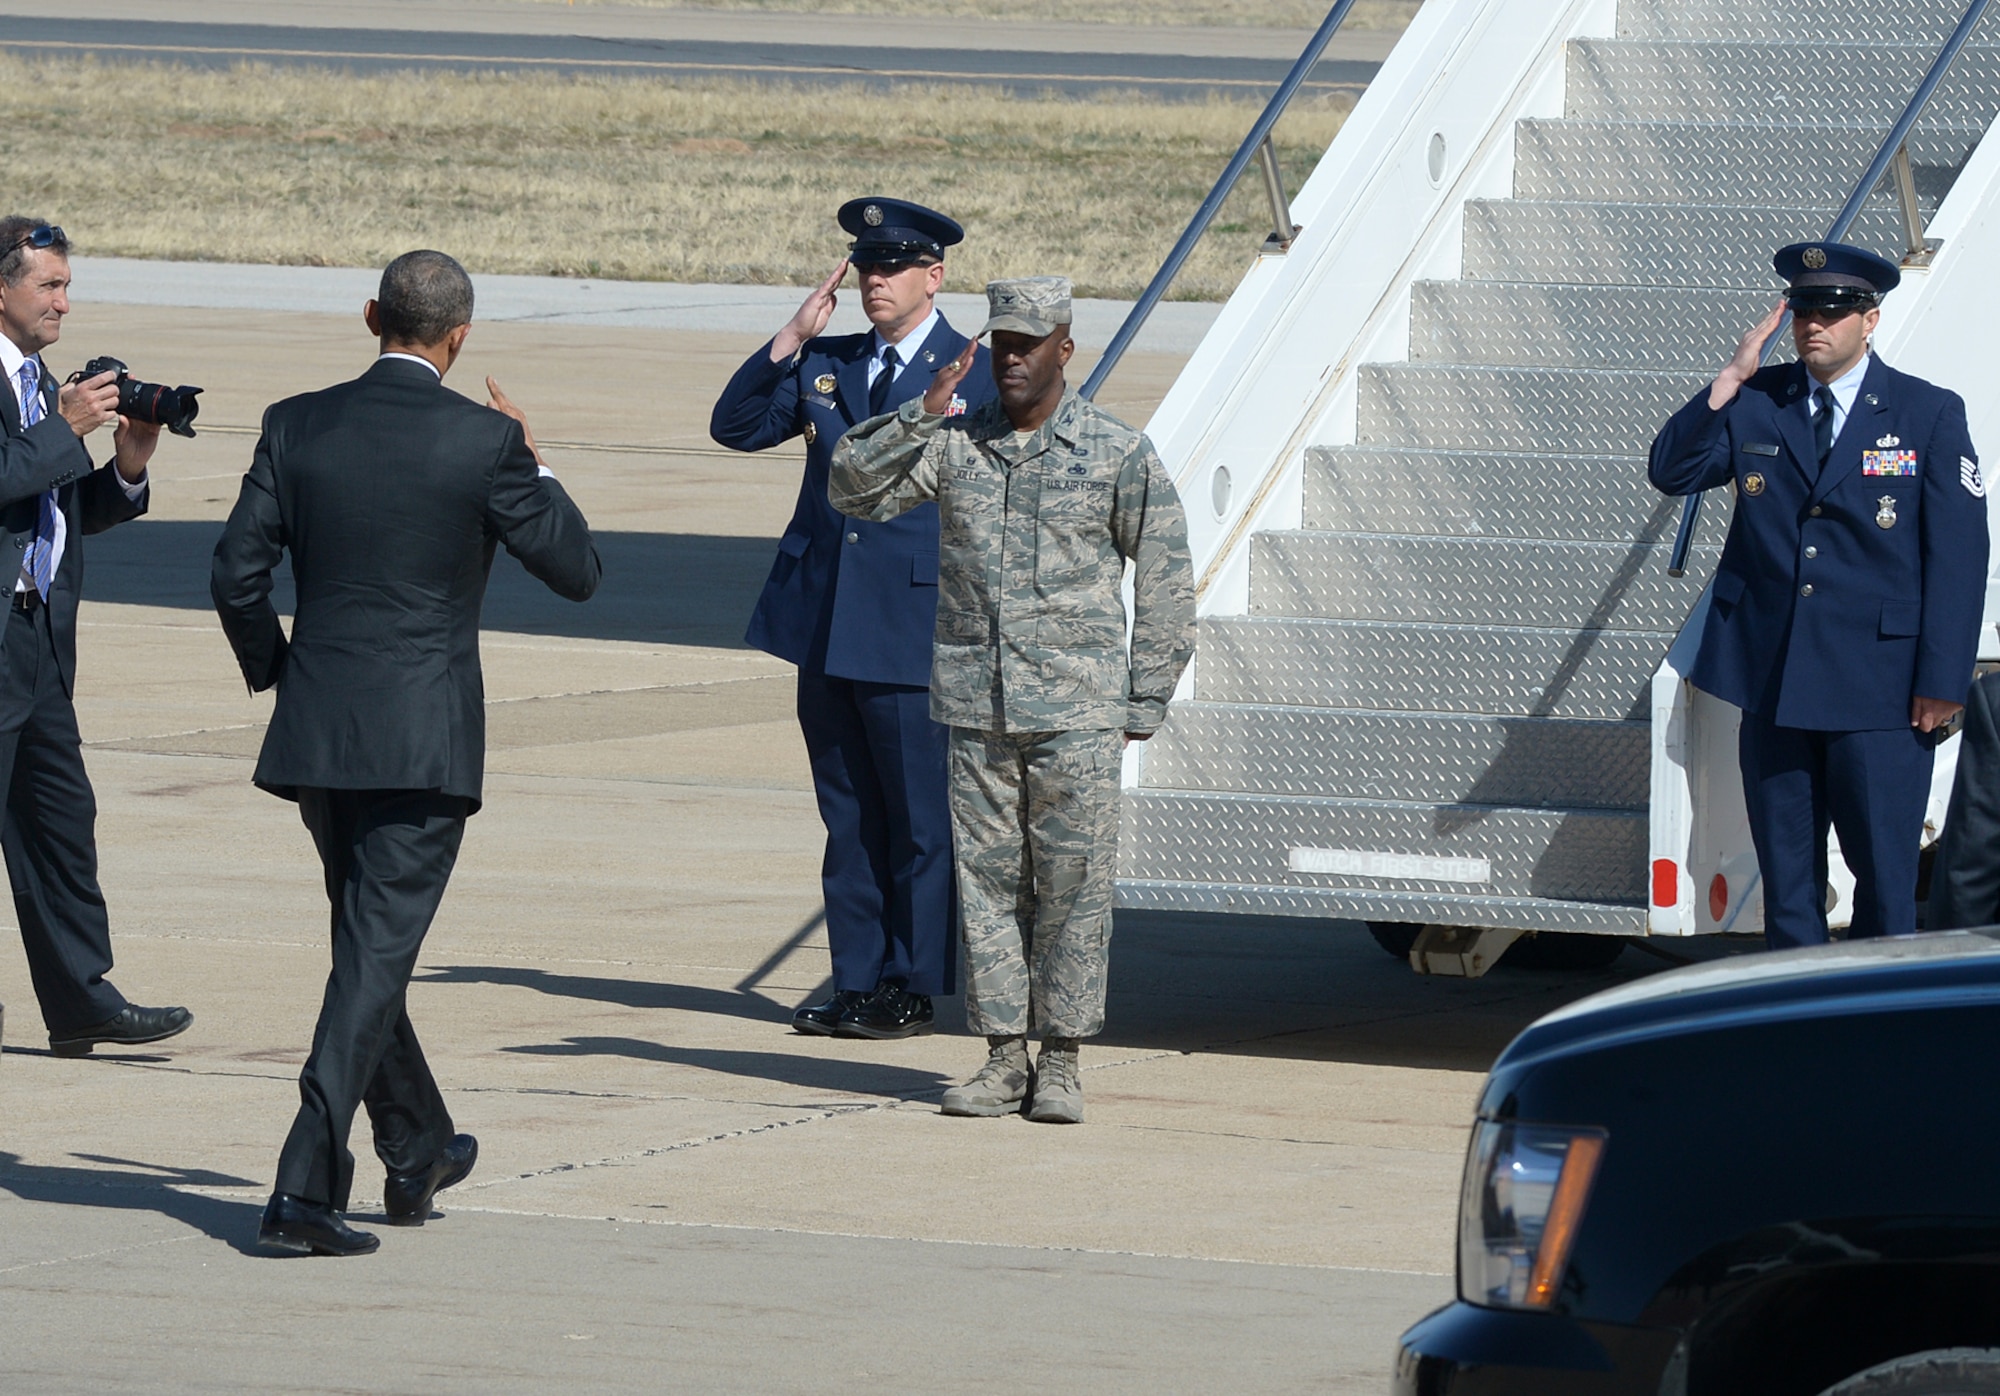 75th Air Base Wing Commander Col. Ron Jolly salutes President Barack Obama as he prepares to depart Hill AFB on April 3. (U.S. Air Force photo by Alex R. Lloyd)